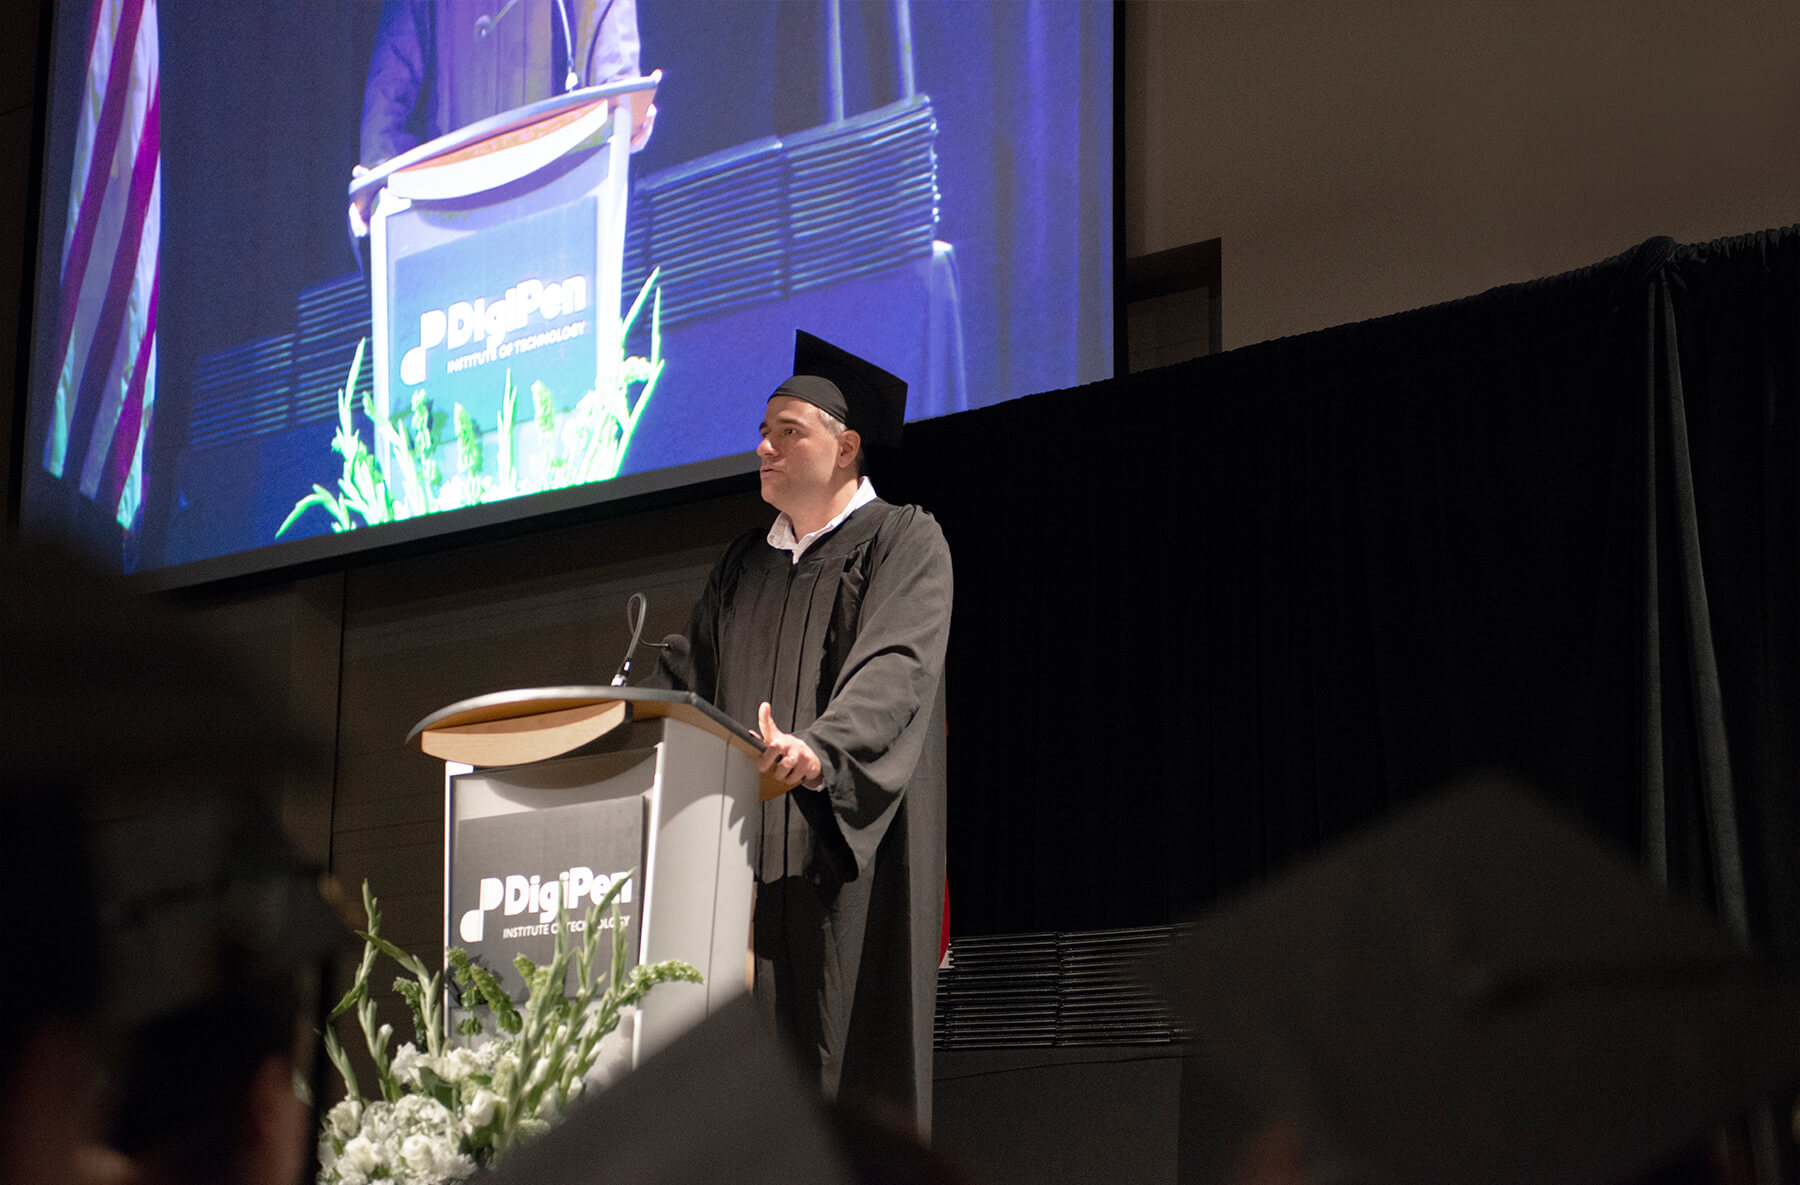 Anthony Saulls delivers a speech on stage at the 2018 DigiPen commencement ceremony.